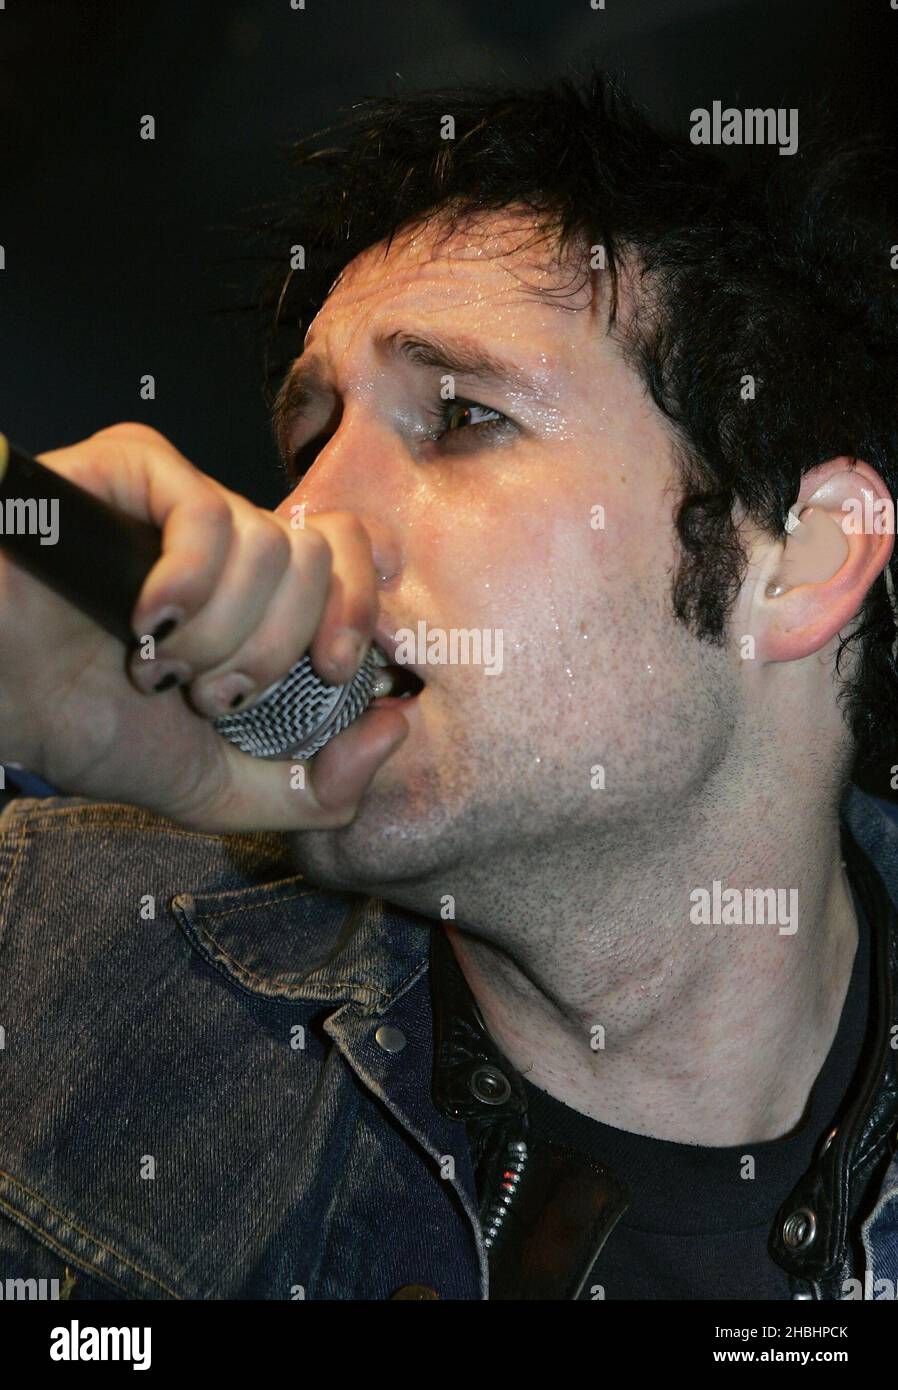 Same Endicott of The Bravery performs on stage at the XFM Christmas Party at the Carling Academy in Islington. Stock Photo